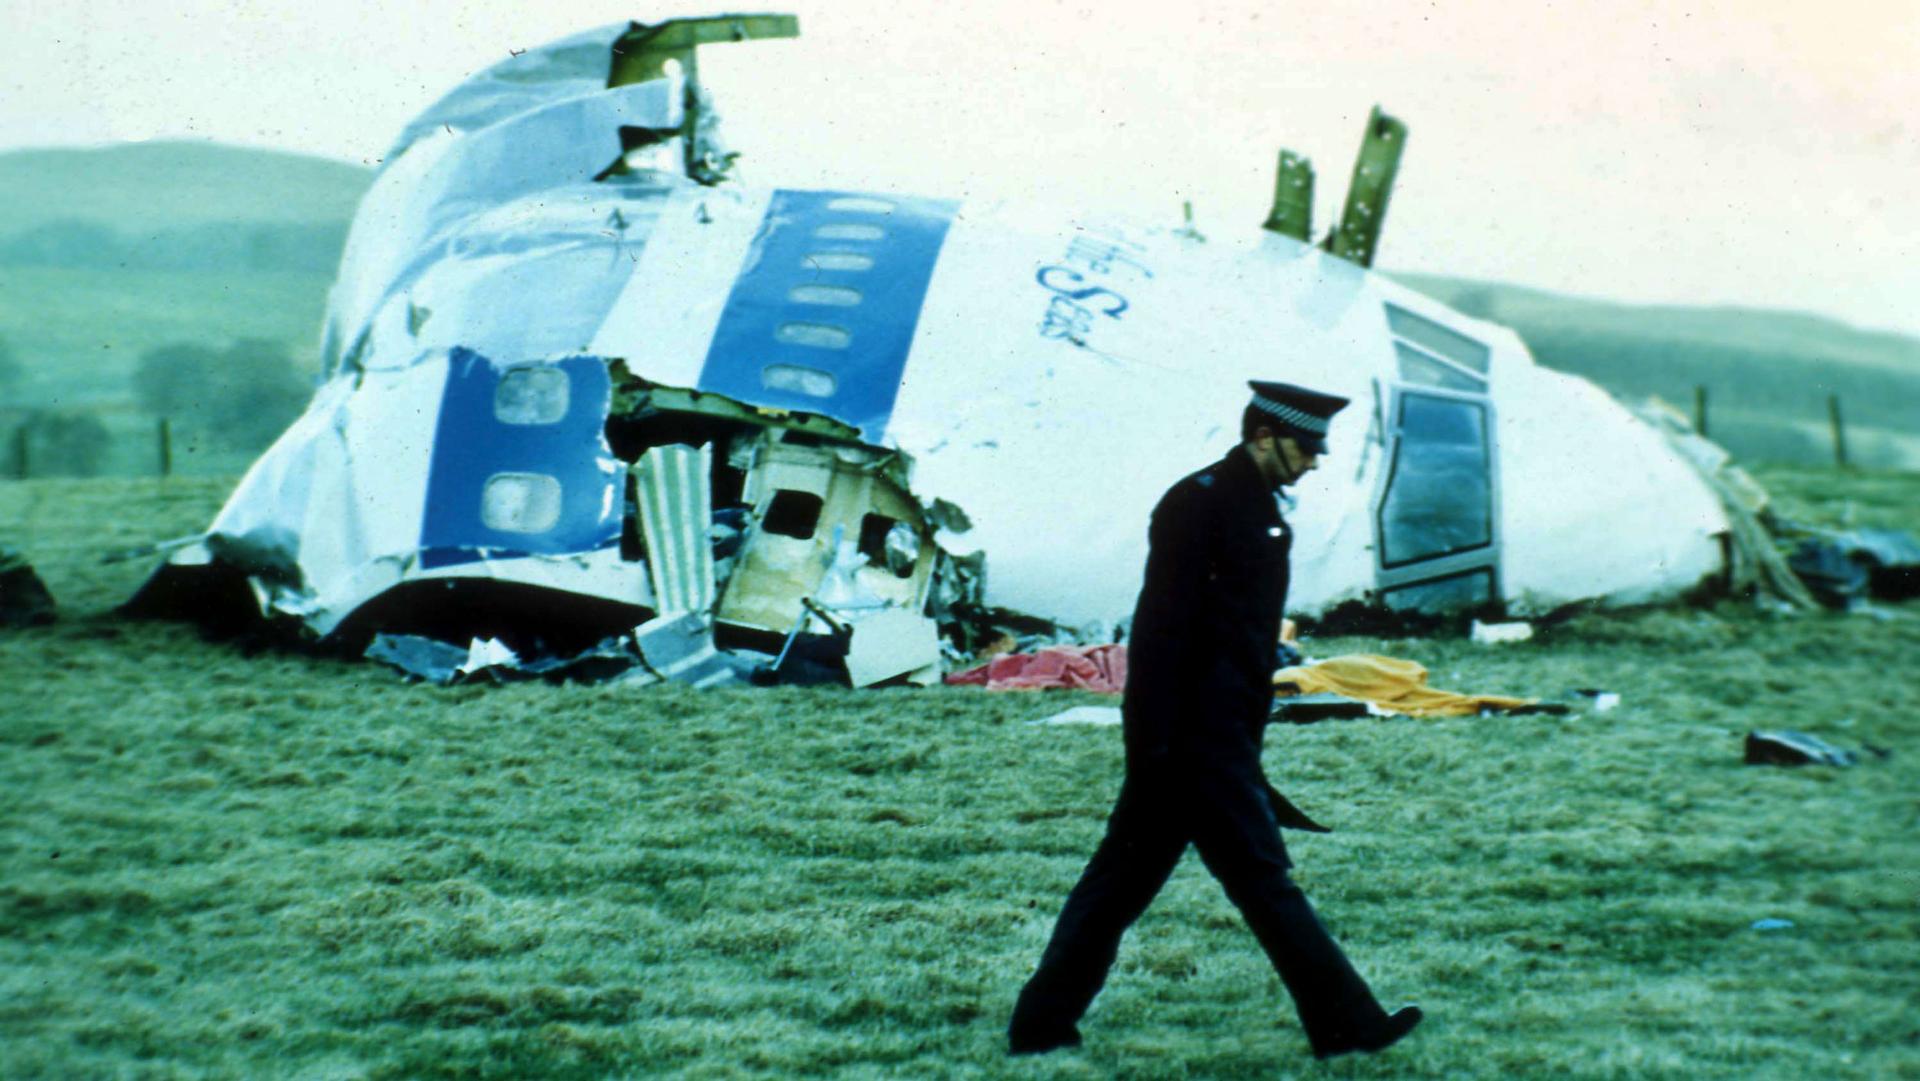 A police officer is shown walking on a grassy meadow with the wreckage of a large white aircraft in the background.